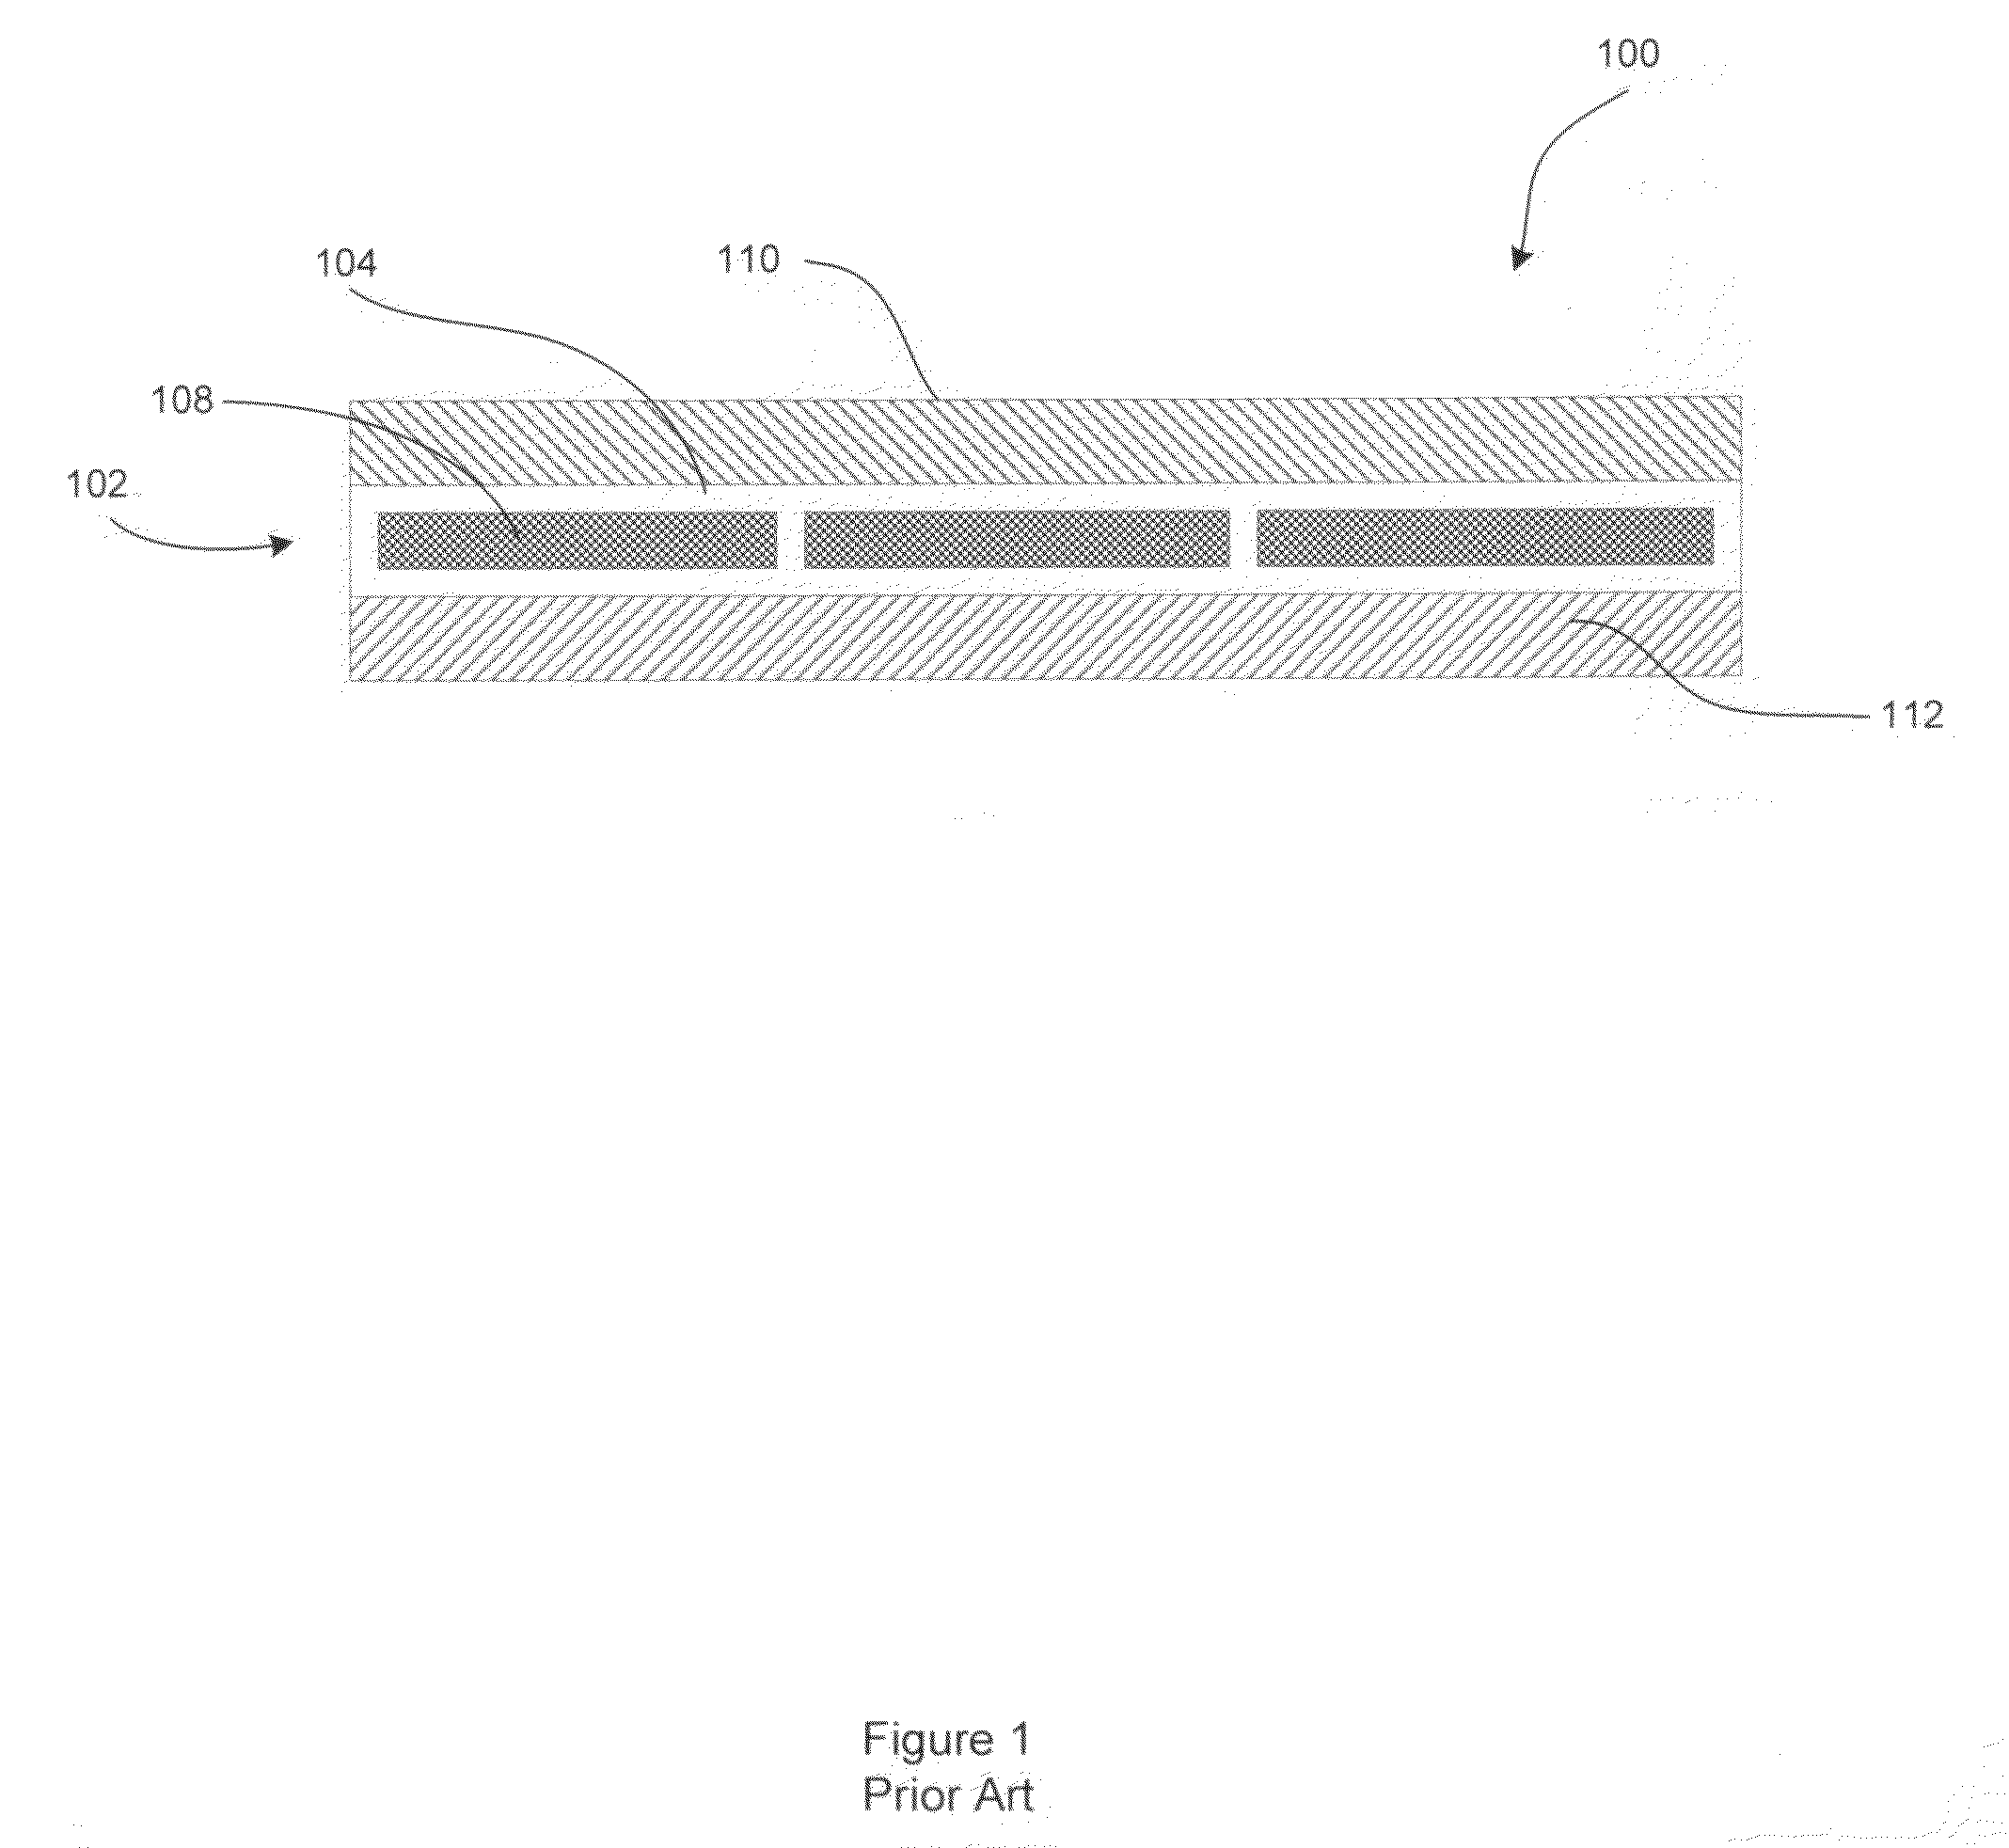 Photovoltaic module containing a metal/polymer stack for enhanced cooling and reflection